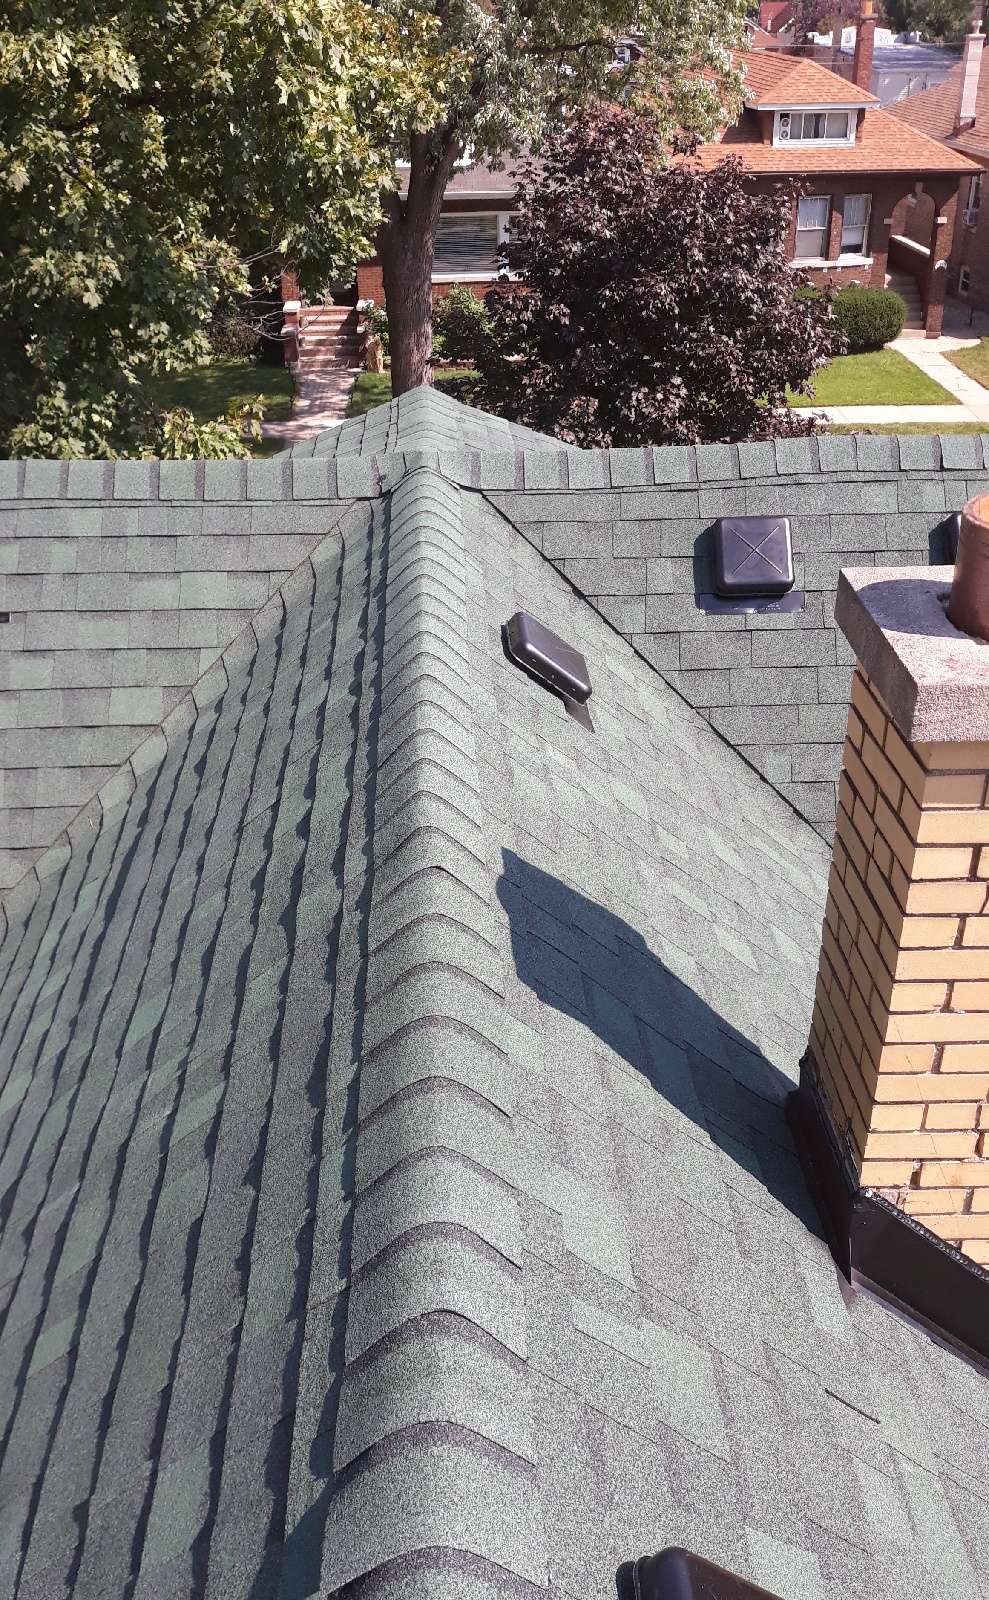 KG Roofing | 15621 117th Ct, Orland Park, IL 60467 | Phone: (708) 205-2413